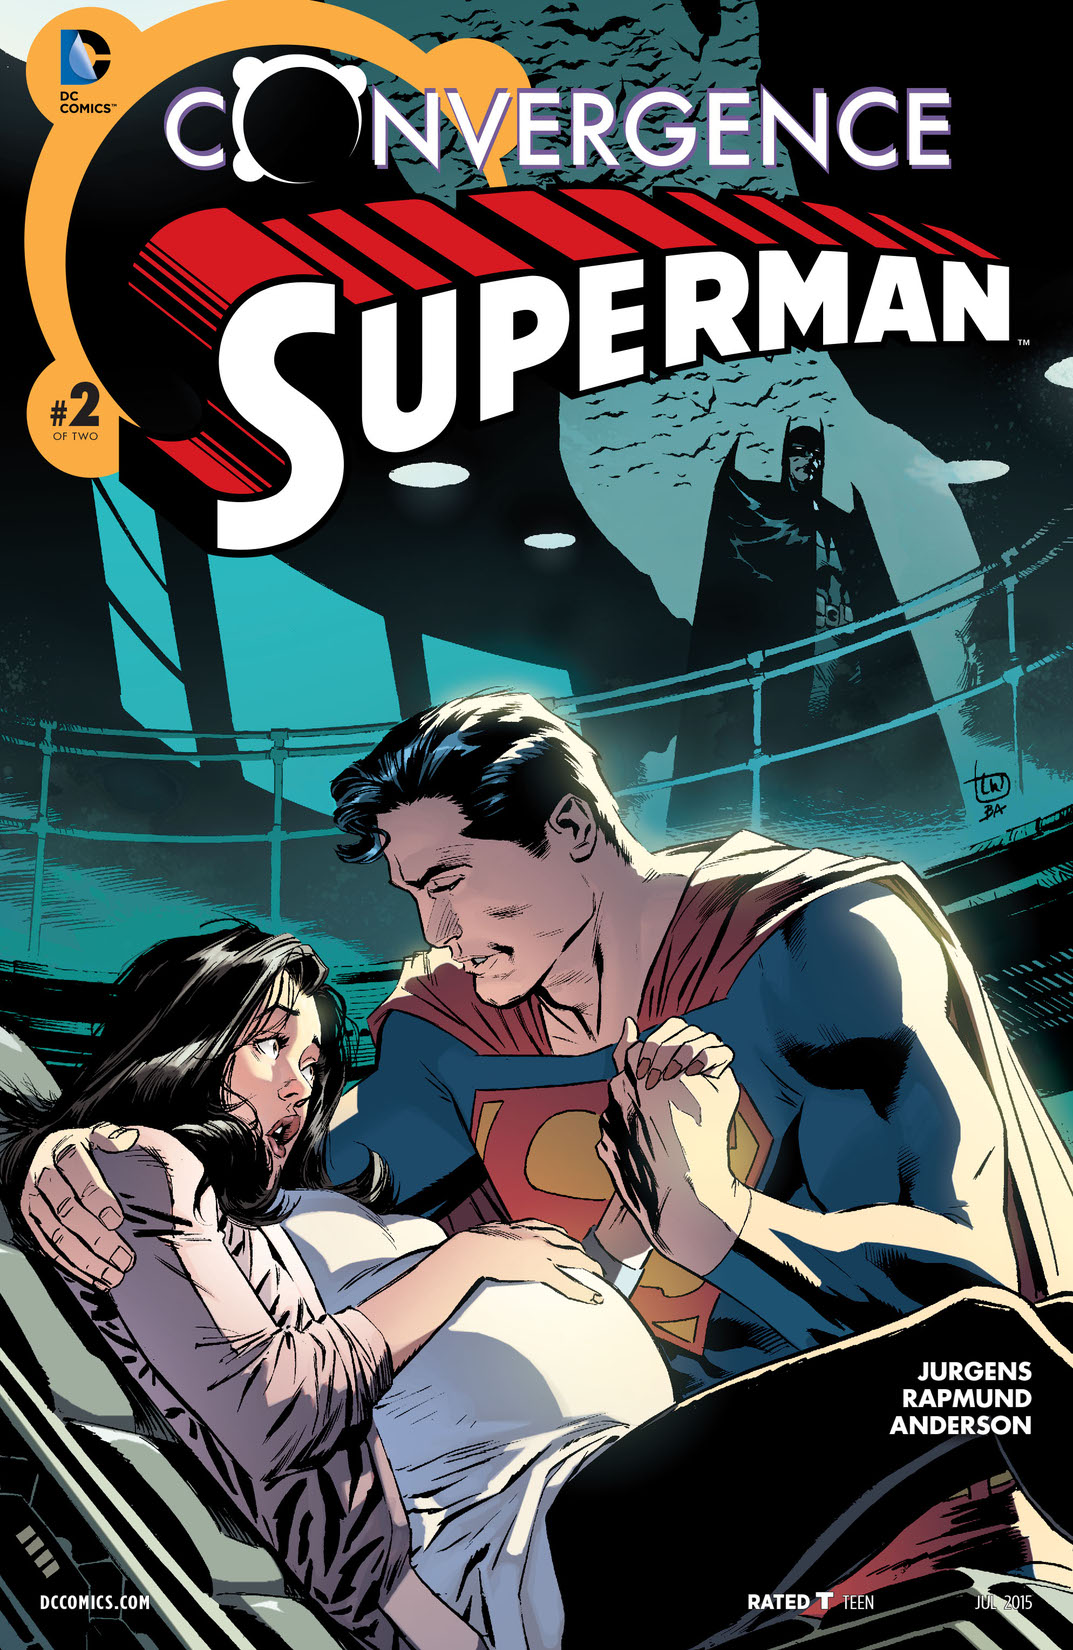 Convergence: Superman #2 preview images